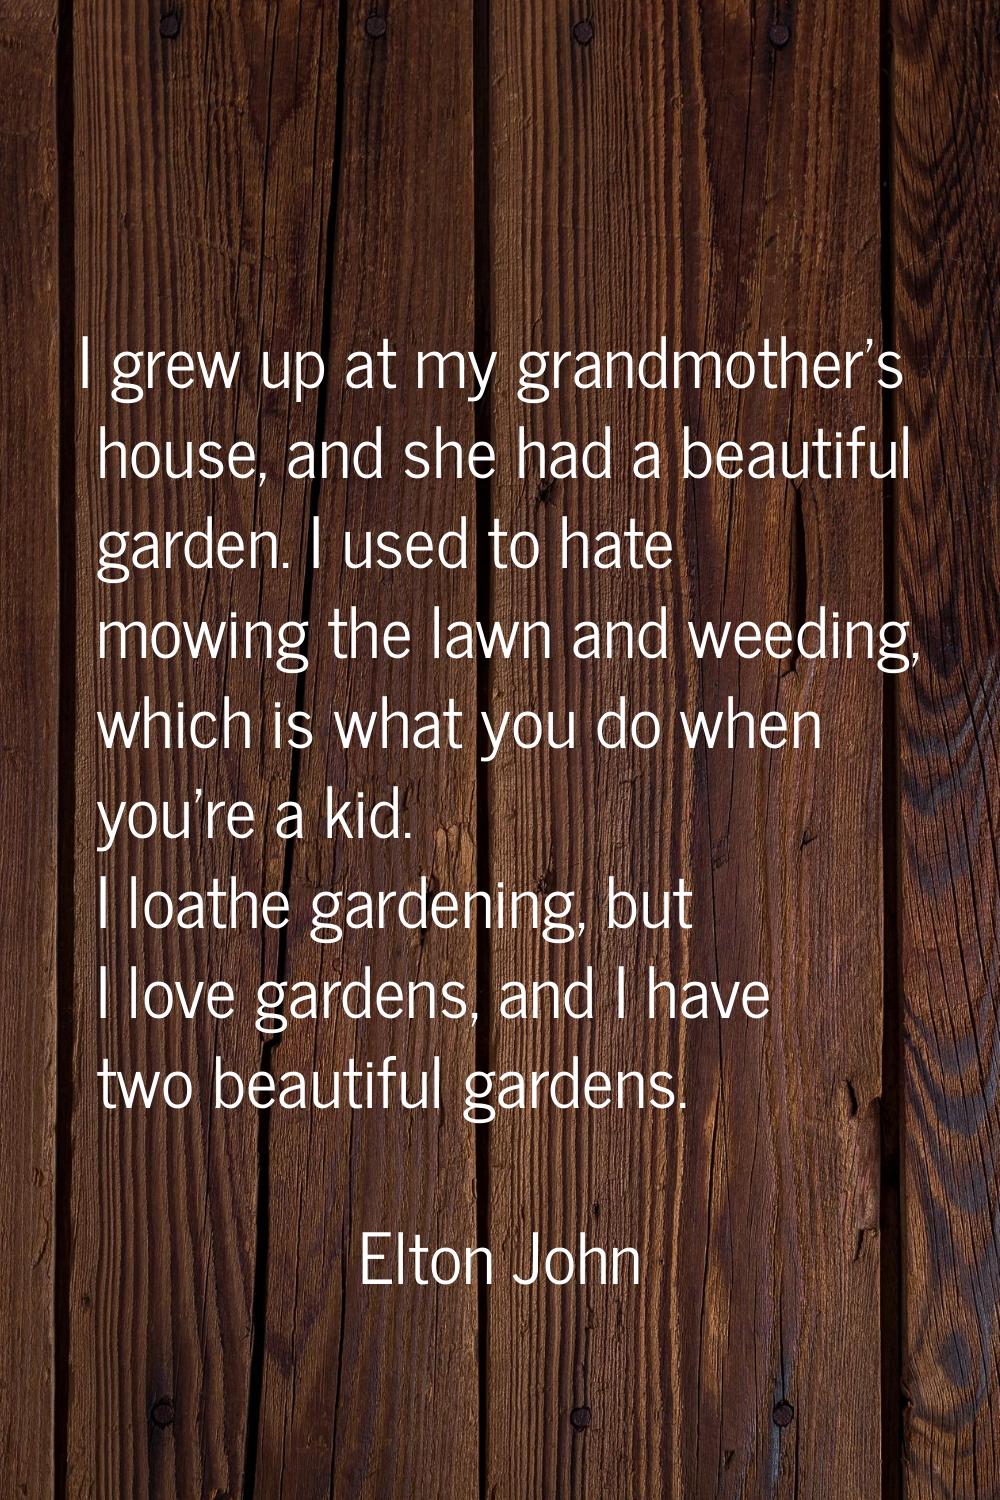 I grew up at my grandmother's house, and she had a beautiful garden. I used to hate mowing the lawn